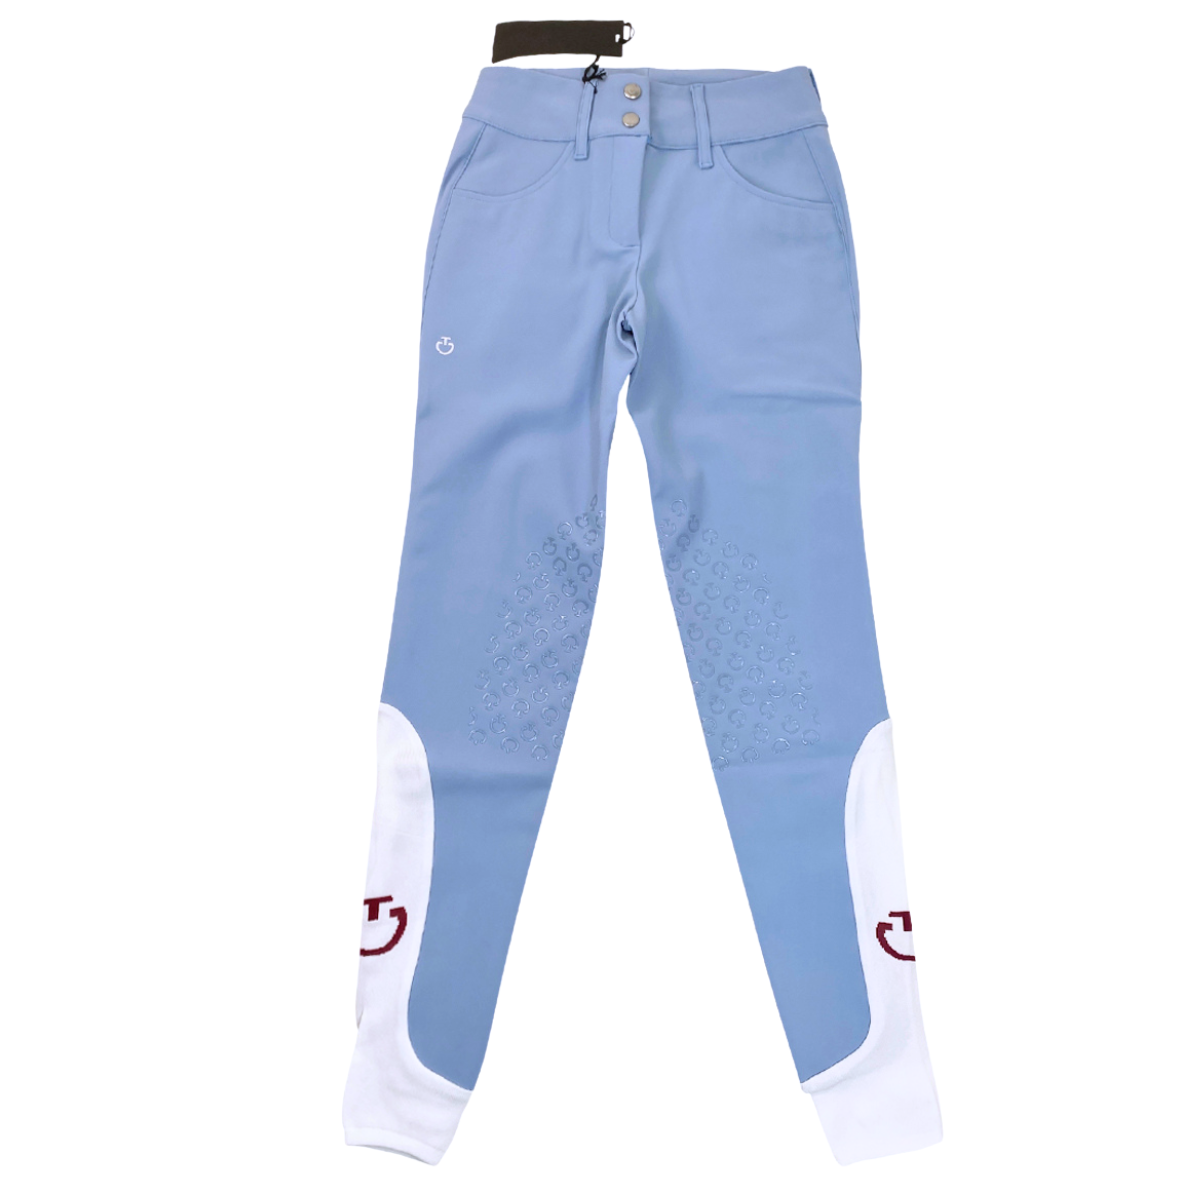 Cavalleria Toscana 'American' High Rise Jumping Breeches in Light Blue